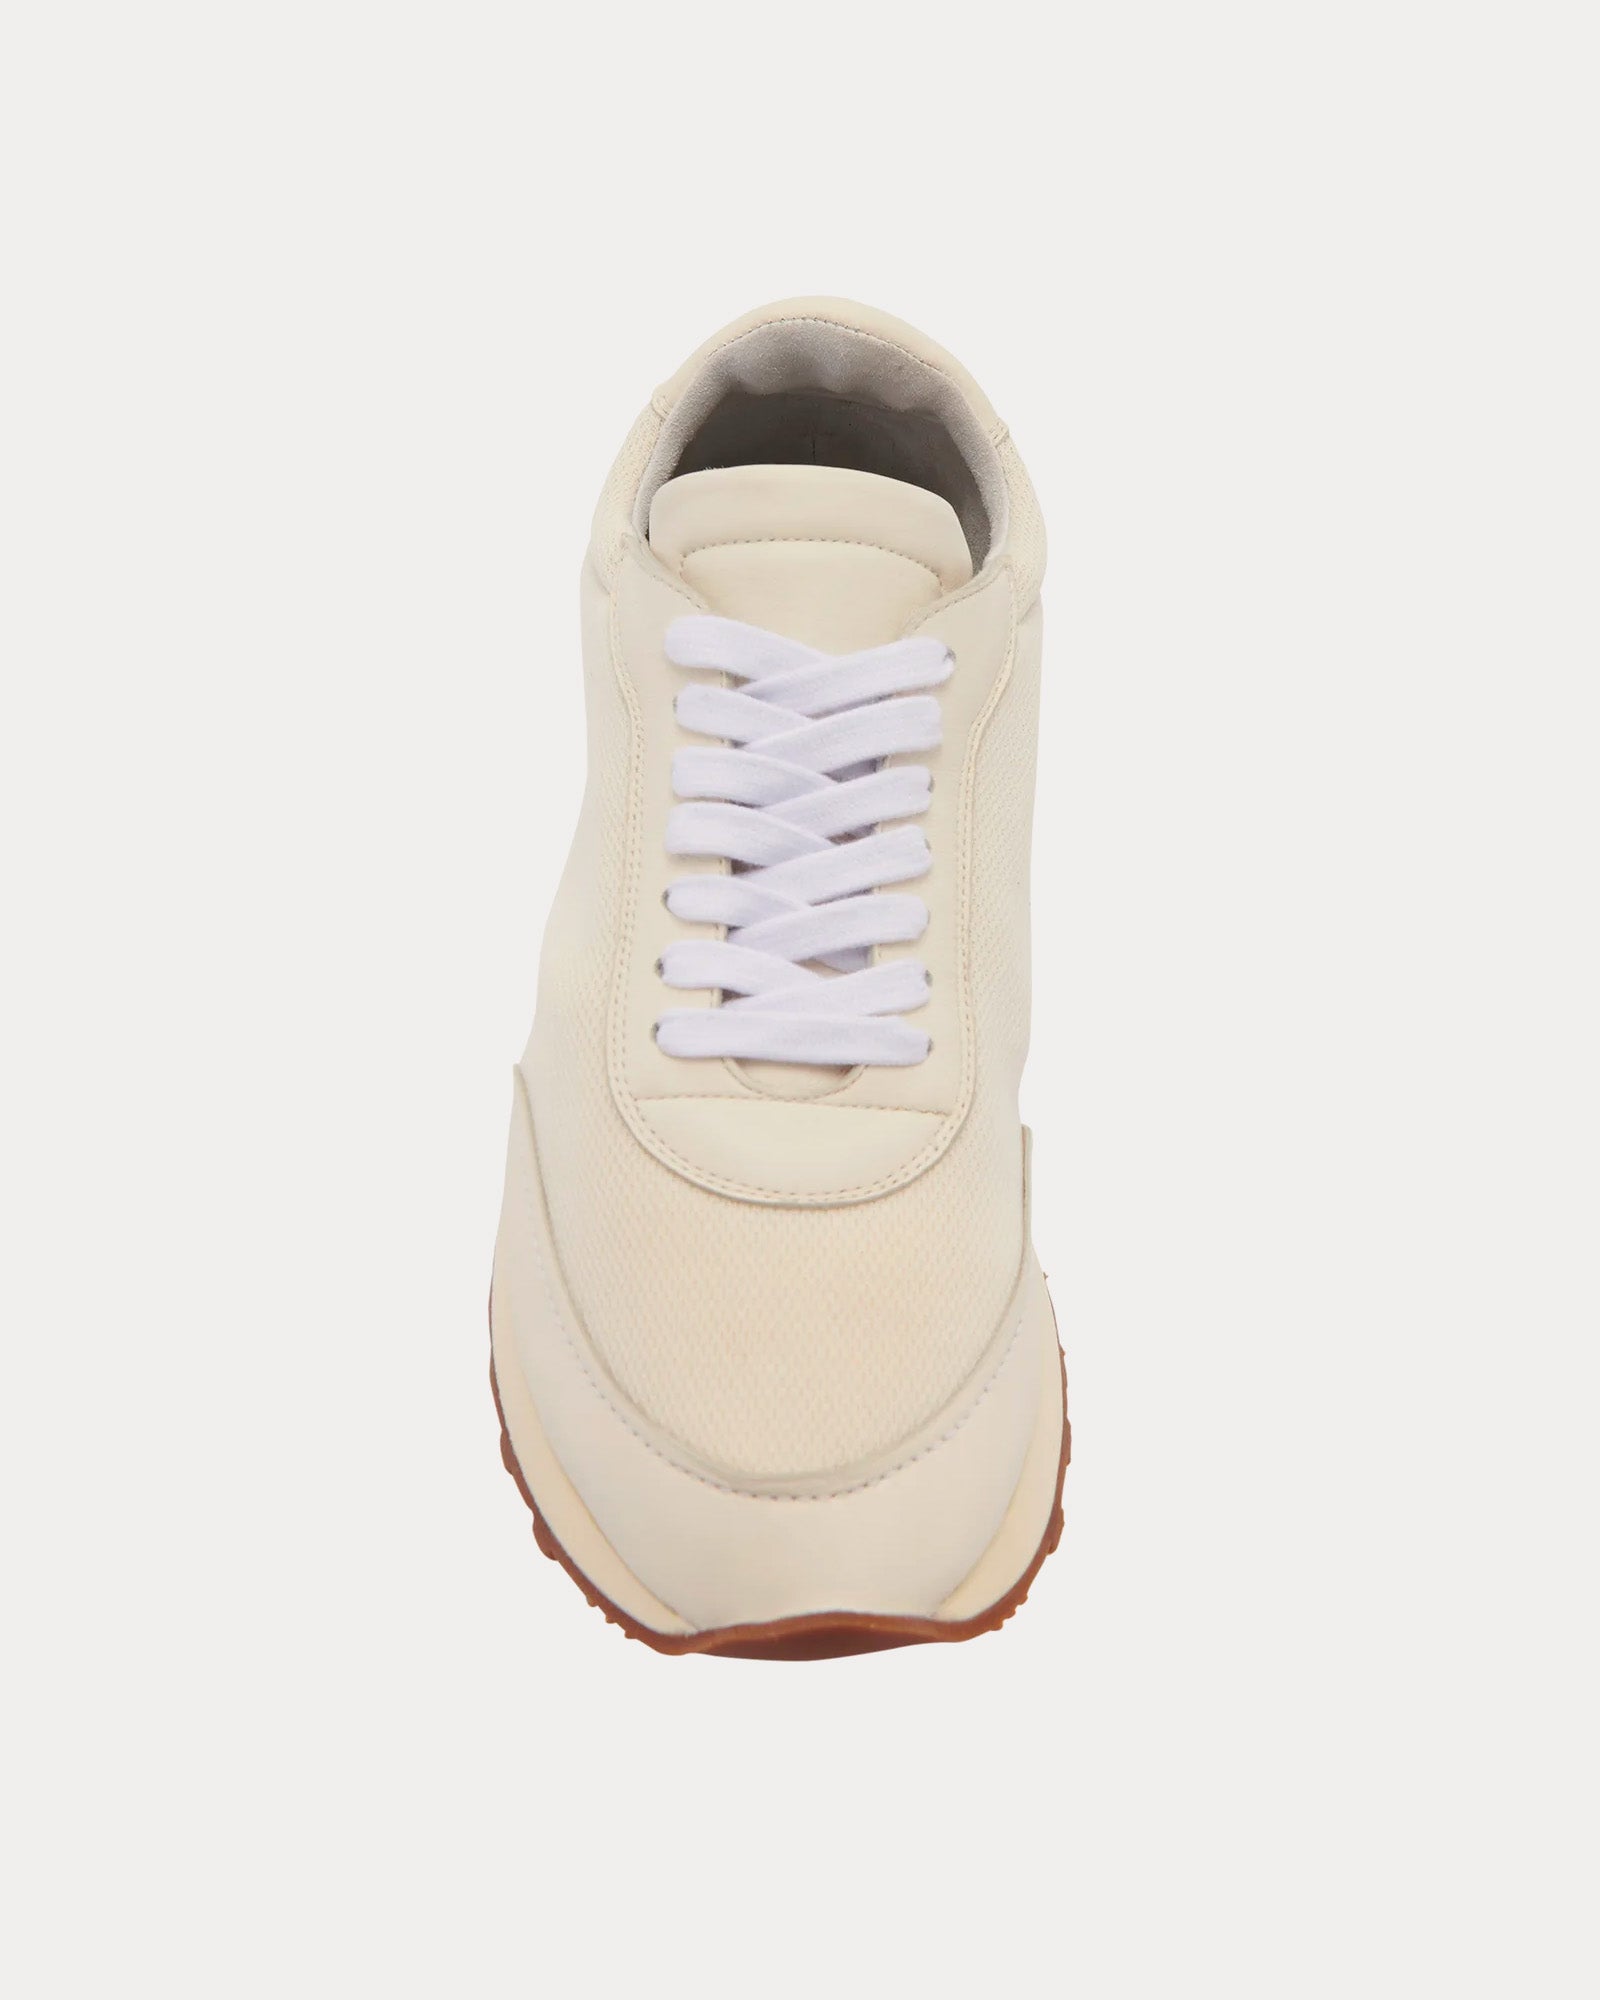 The Row - Owen Runner Leather & Nylon Milk / White / Brown Low Top Sneakers